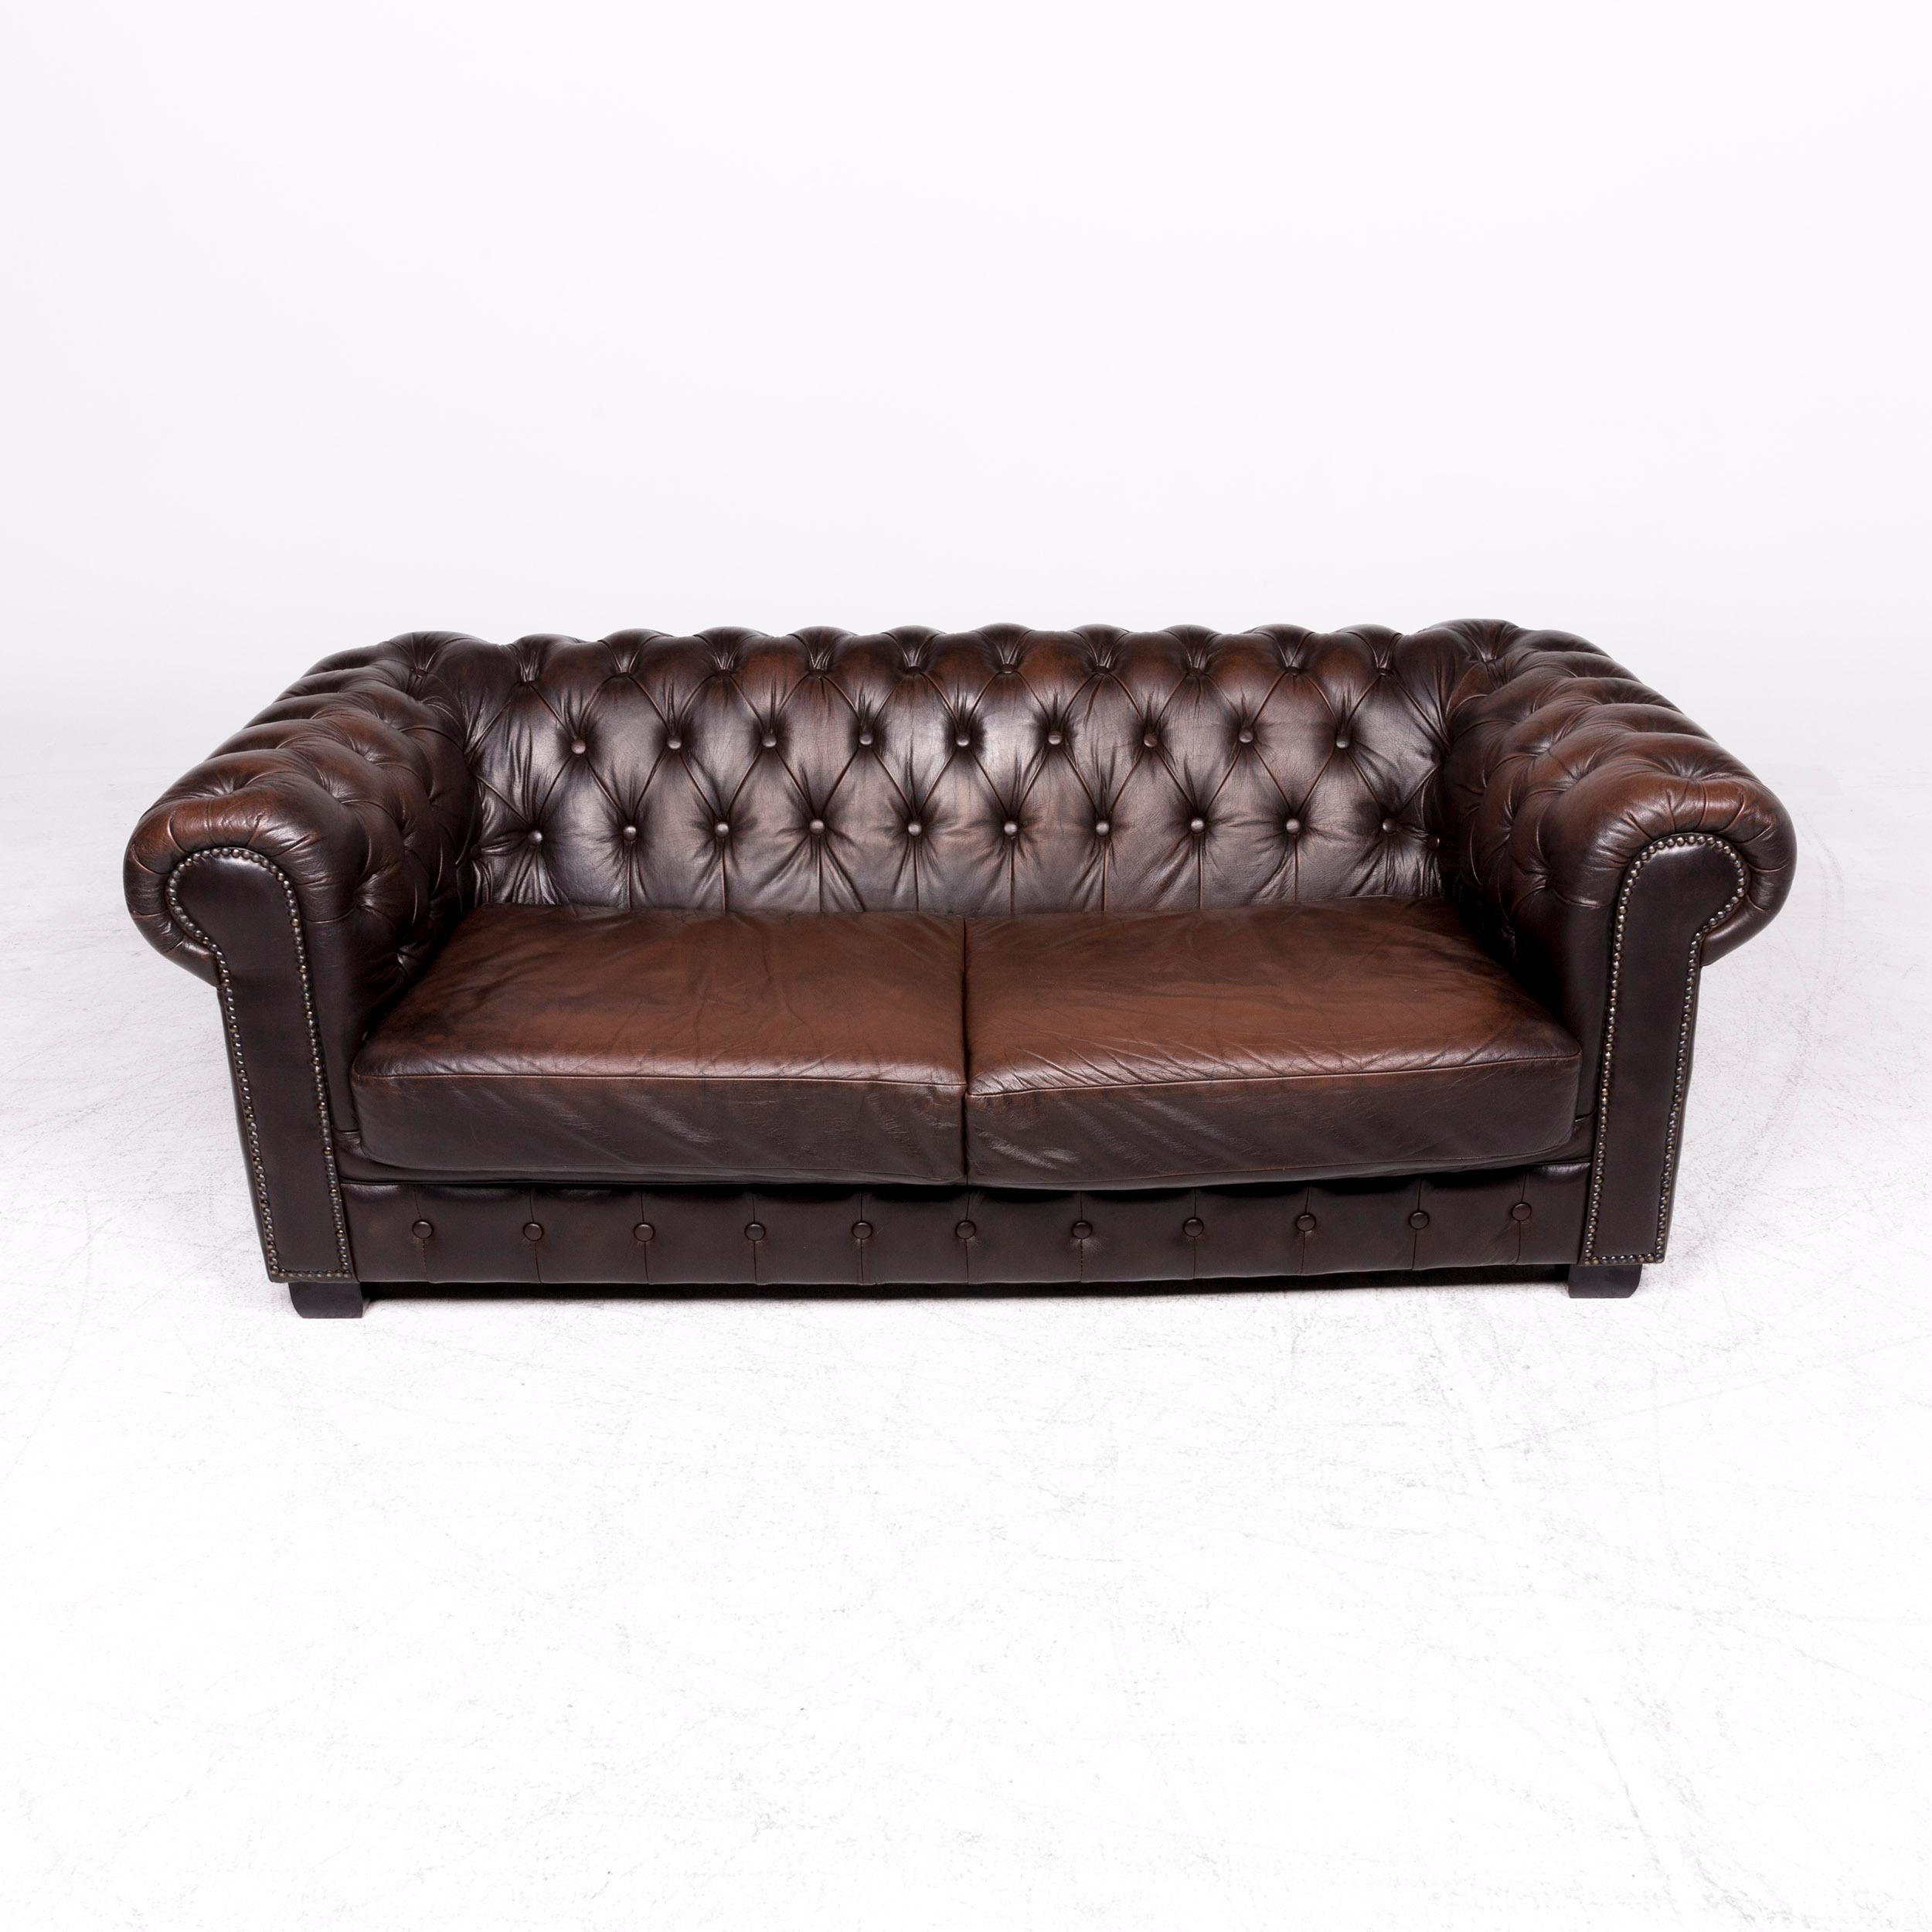 British Chesterfield Leather Sofa Brown Genuine Leather Three-Seat Couch Vintage Retro